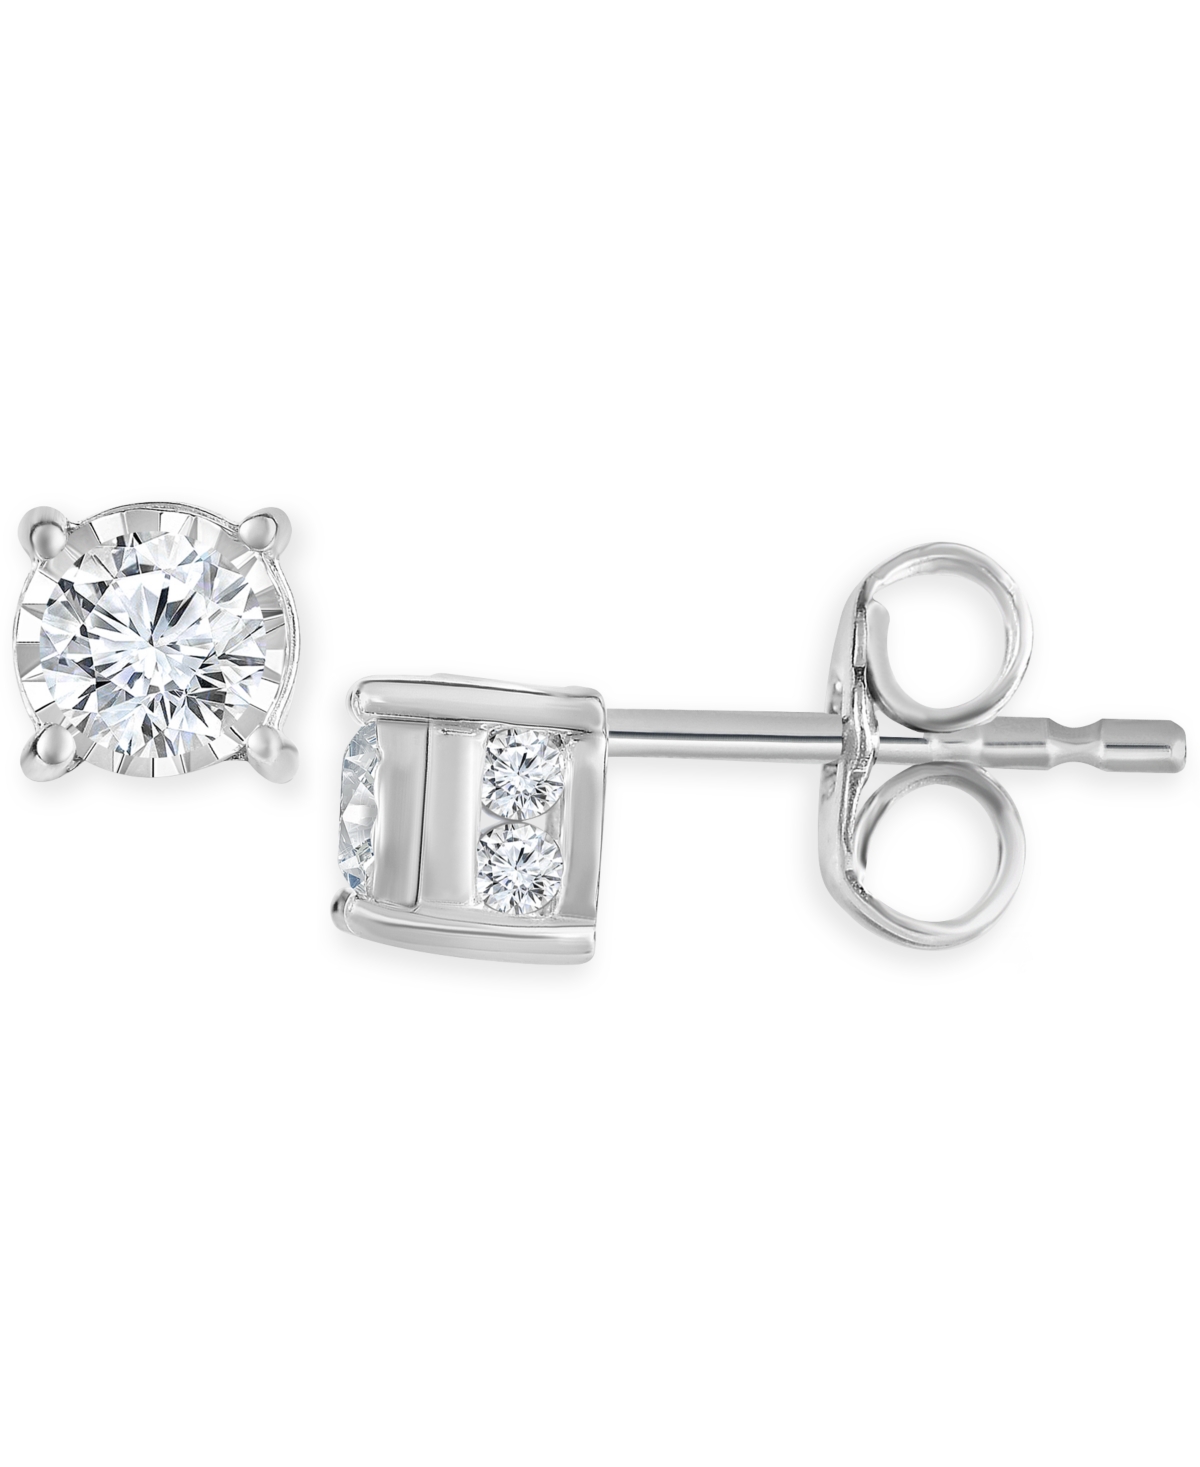 Diamond Stud Earrings (1/2 ct. t.w.) in 14k White, Yellow or Rose Gold - Yellow Gold